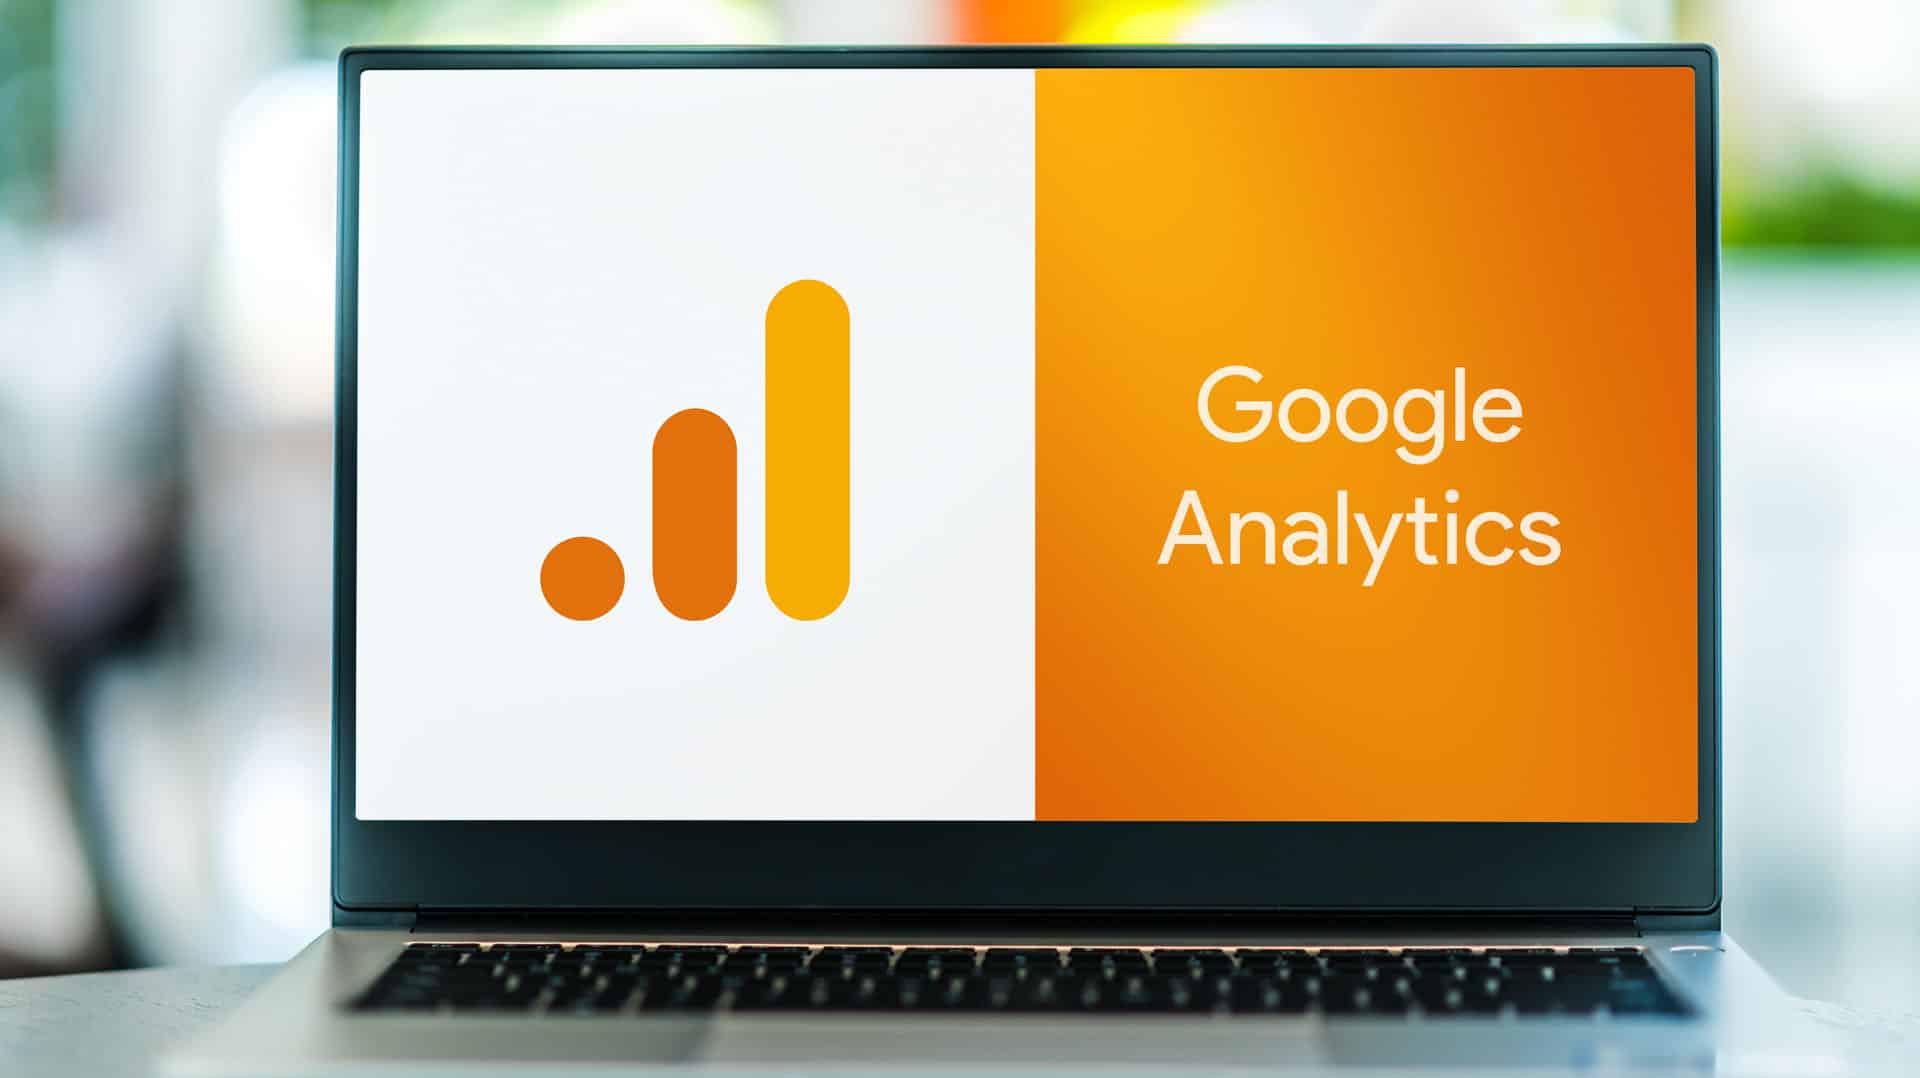 How To Disconnect Google Analytics 4 From Universal Analytics To Delete UA Property